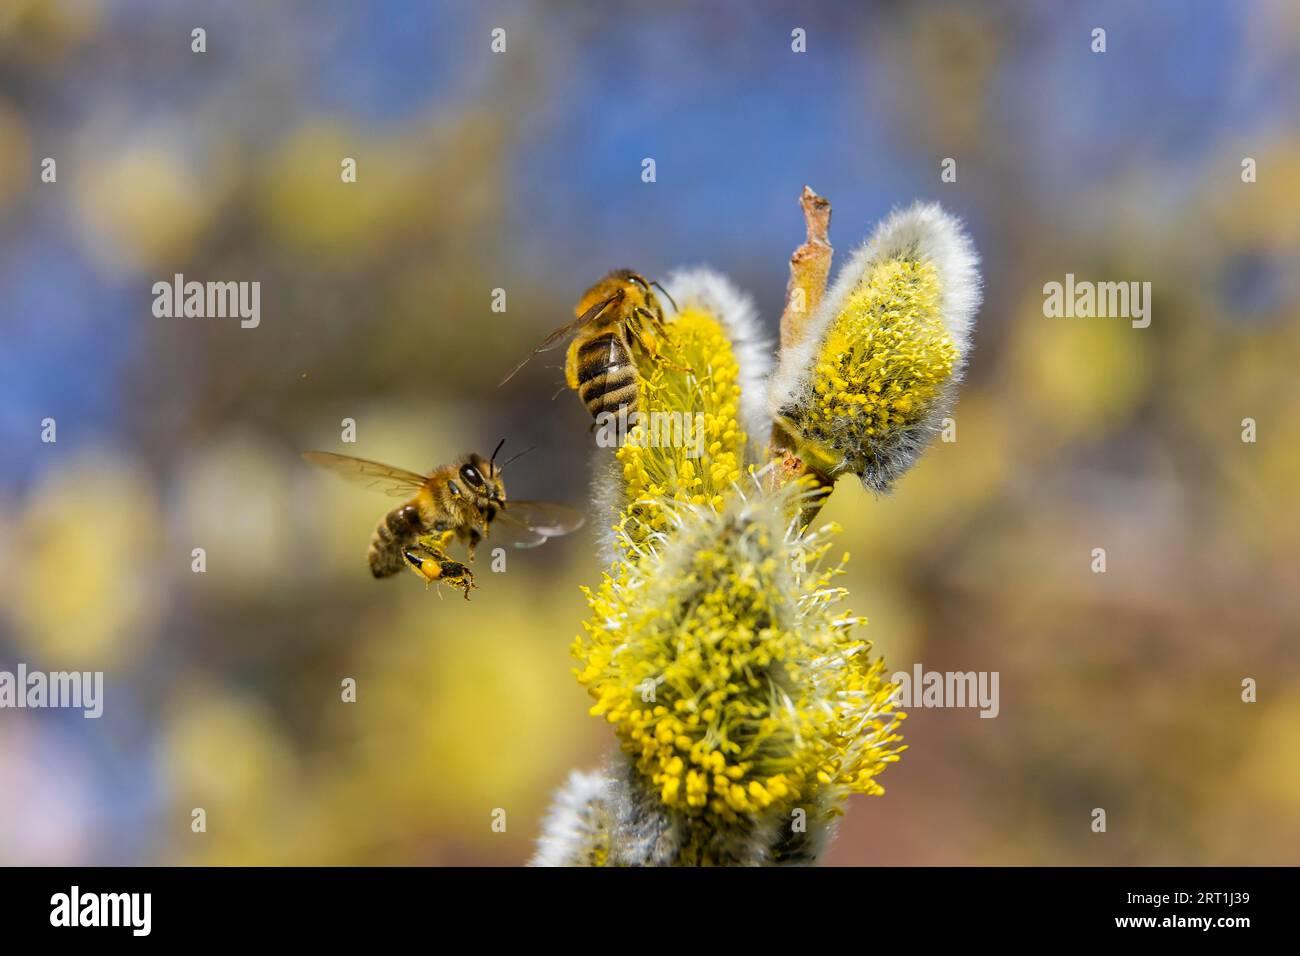 Willows bloom in a meadow, first wild bees fly to the catkins named and protected flowers to collect pollen Stock Photo